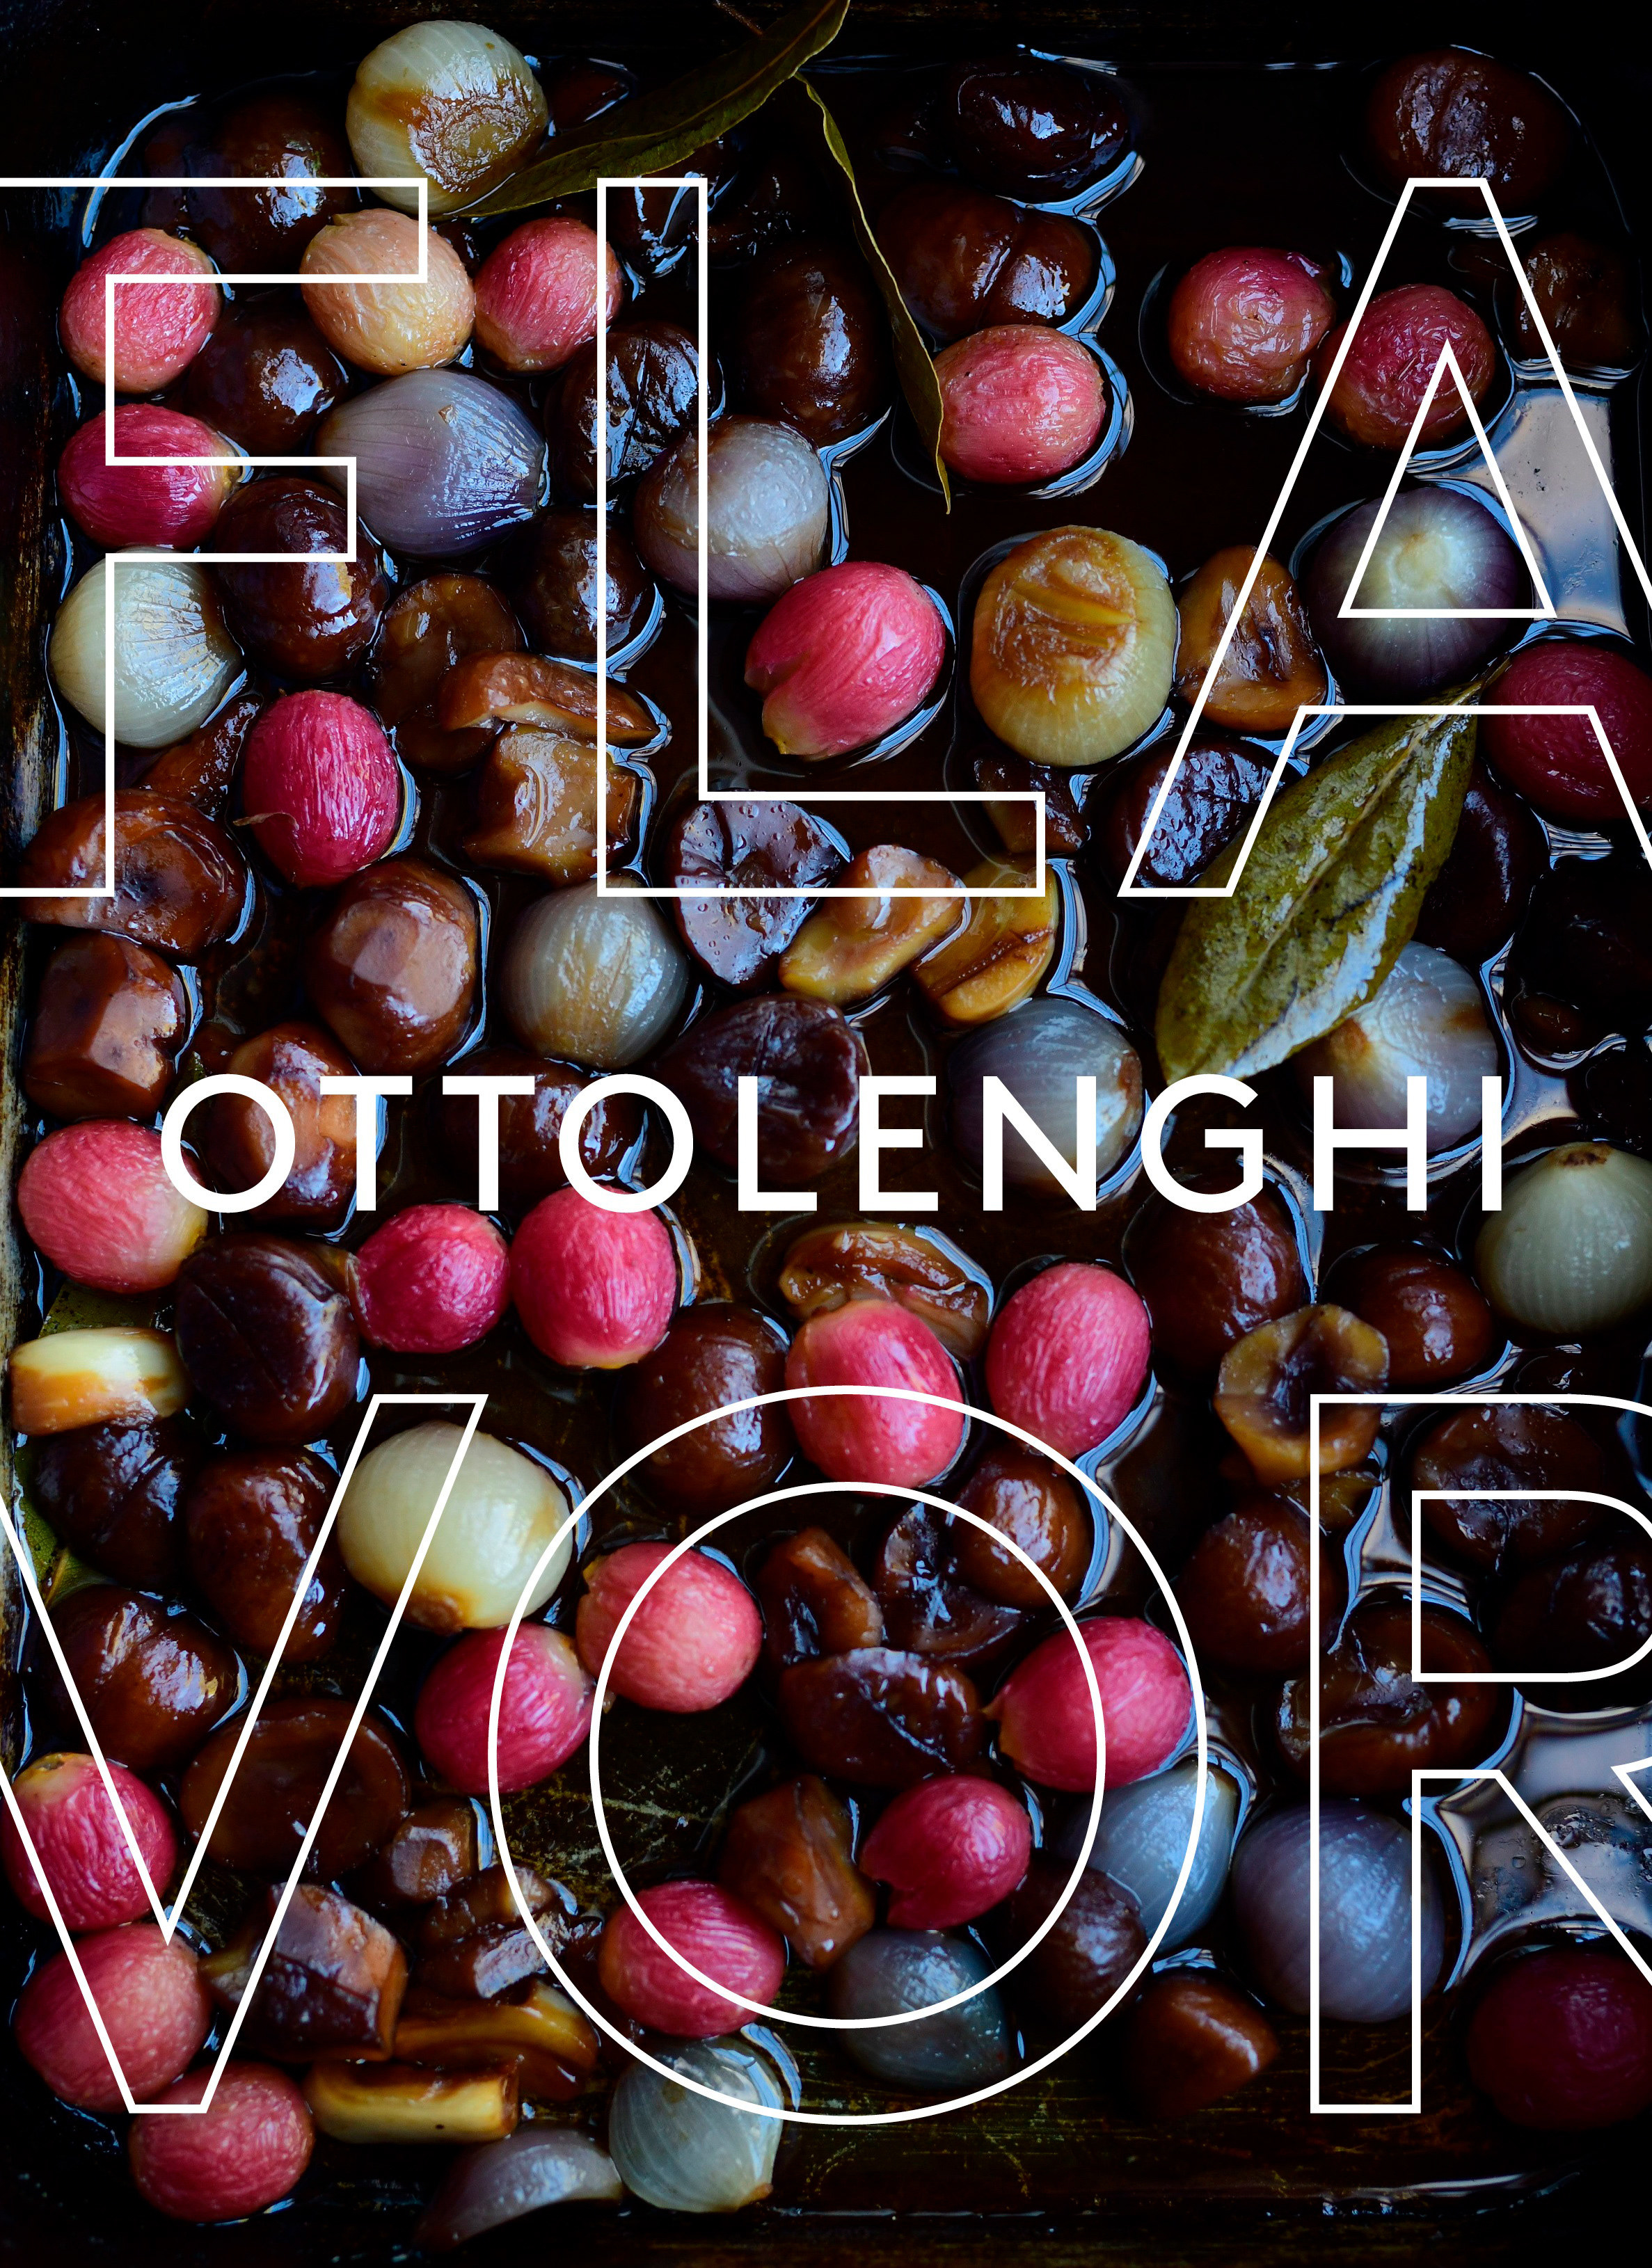 The cover of &#x27;Ottolenghi Flavor&#x27; by Yotam Ottolenghi